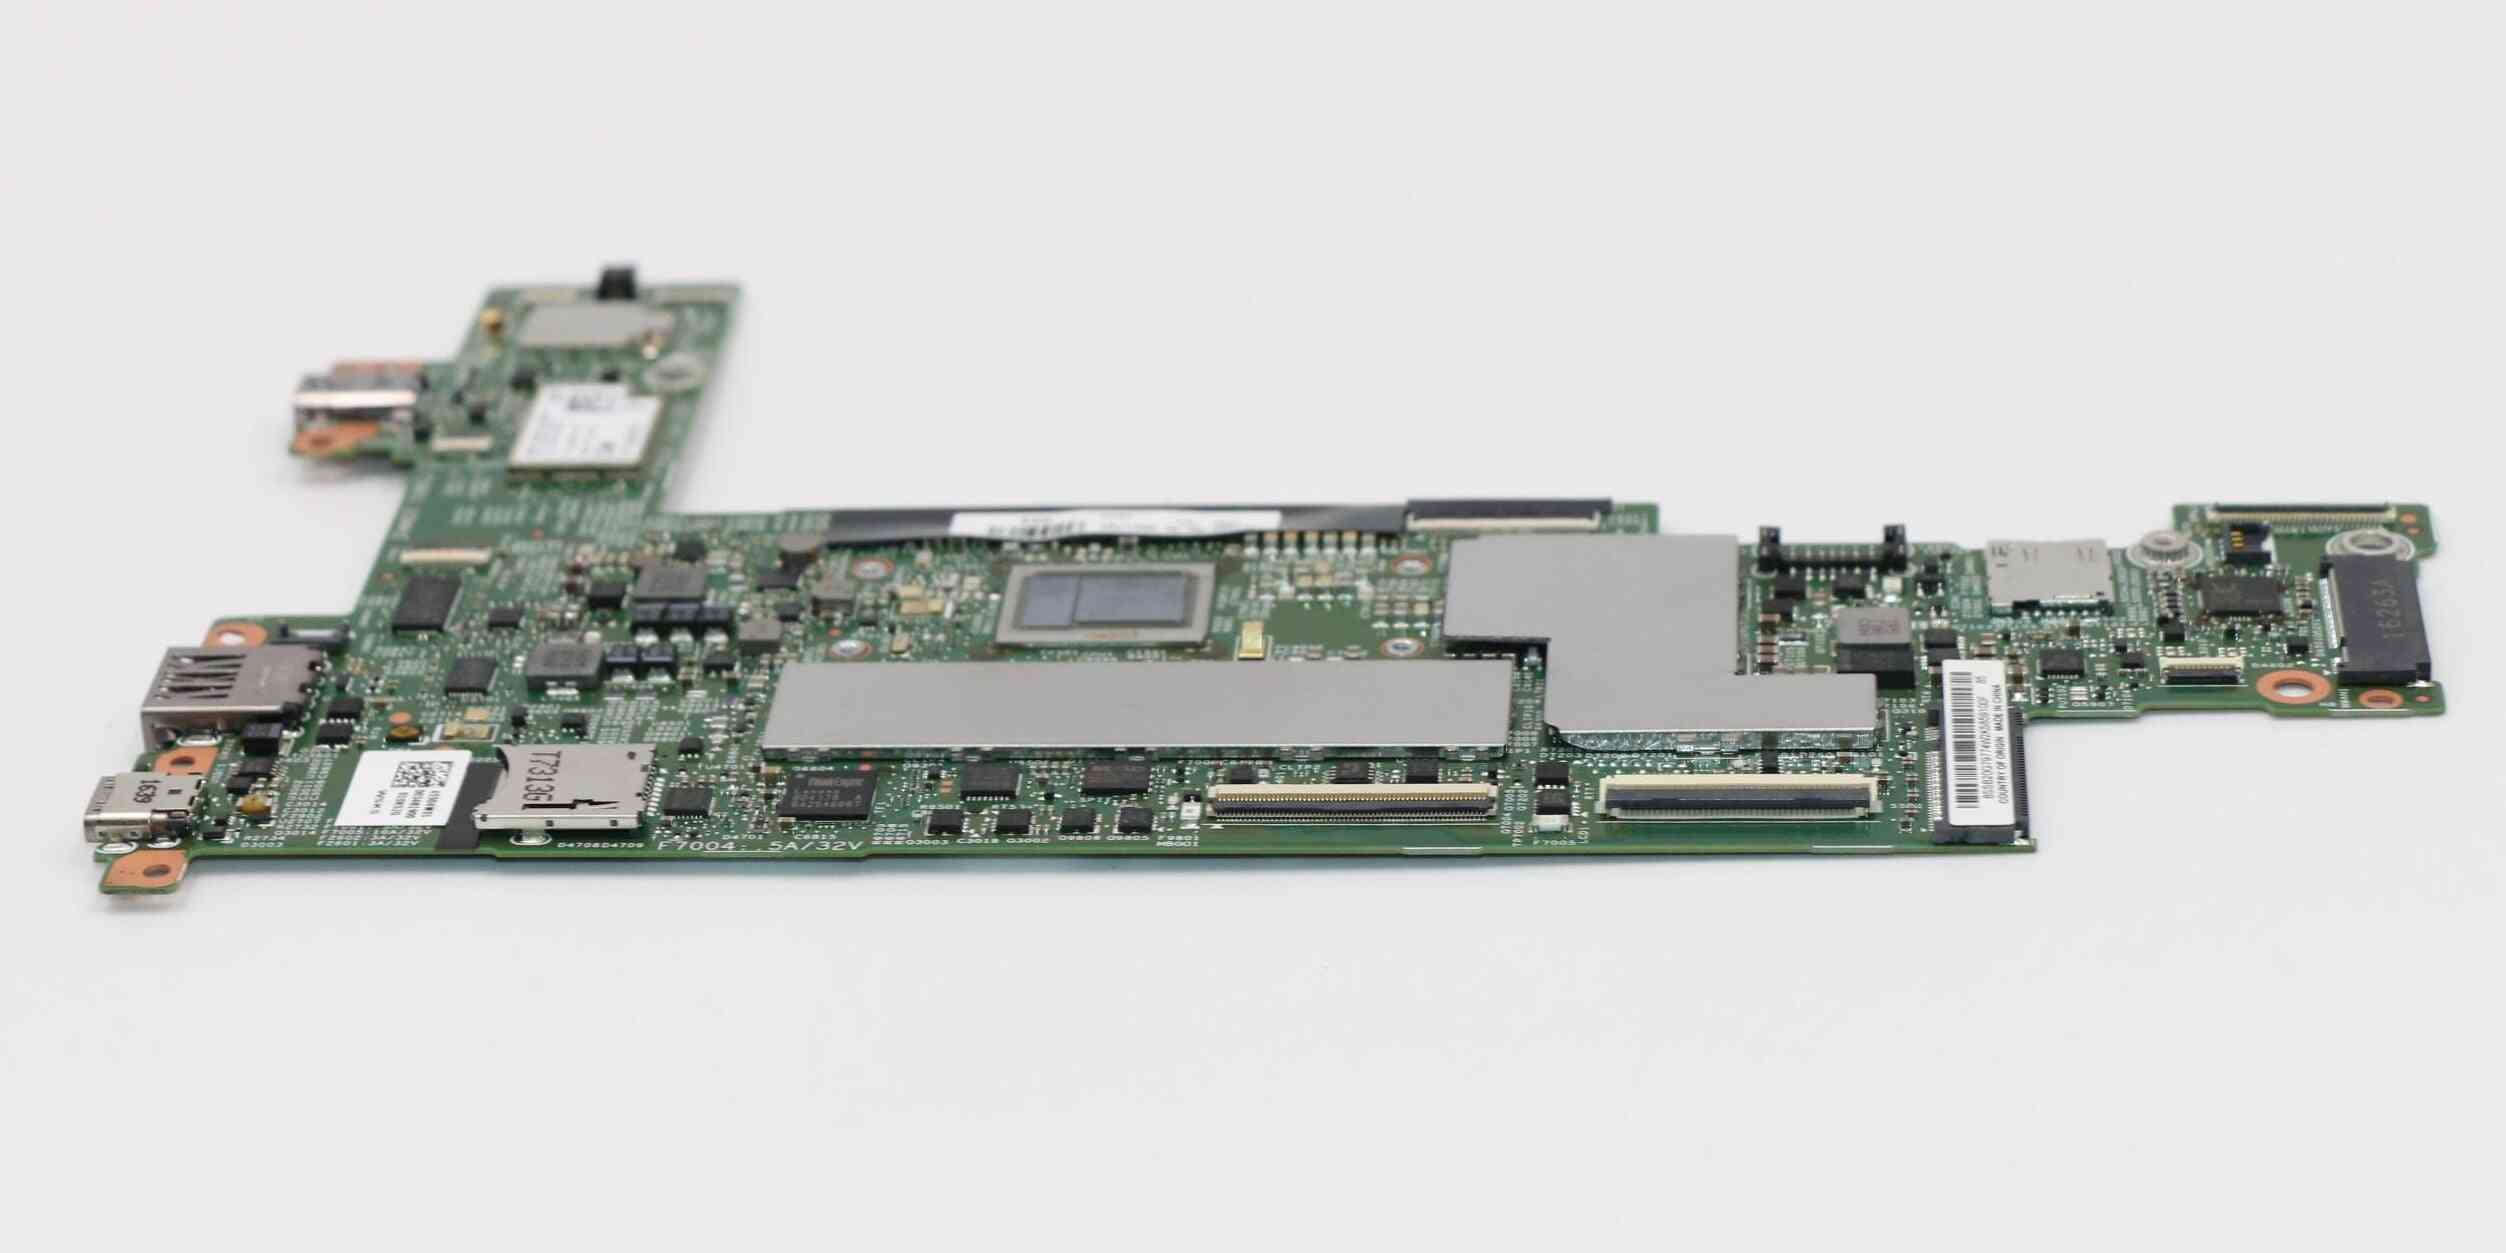 X1 Tablet 15218-2, Laptop Integrated Motherboard, Fru 00ny763 With Cpu And Ram M7-6y75, 16gb